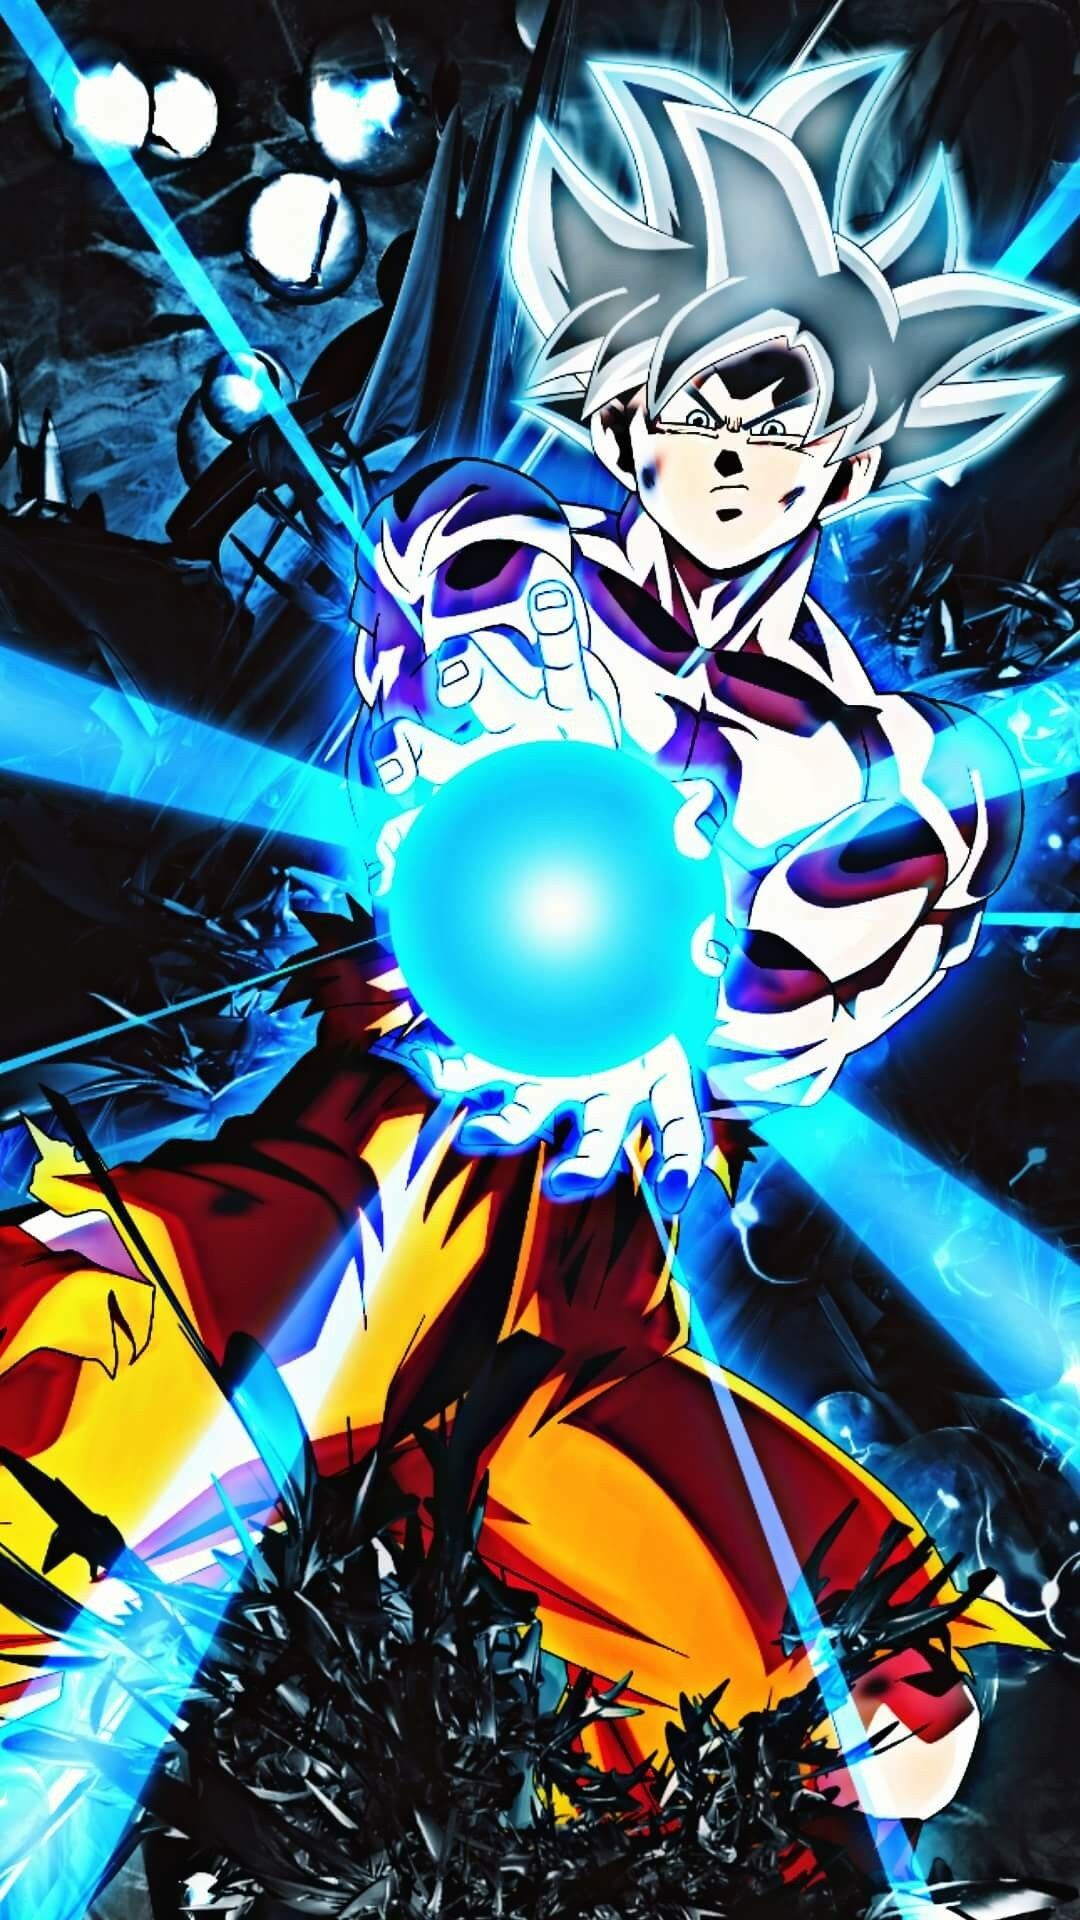 Goku Kamehameha: Anime character shooting out a streaming, powerful beam of energy, Dragon Ball media franchise. 1080x1920 Full HD Background.